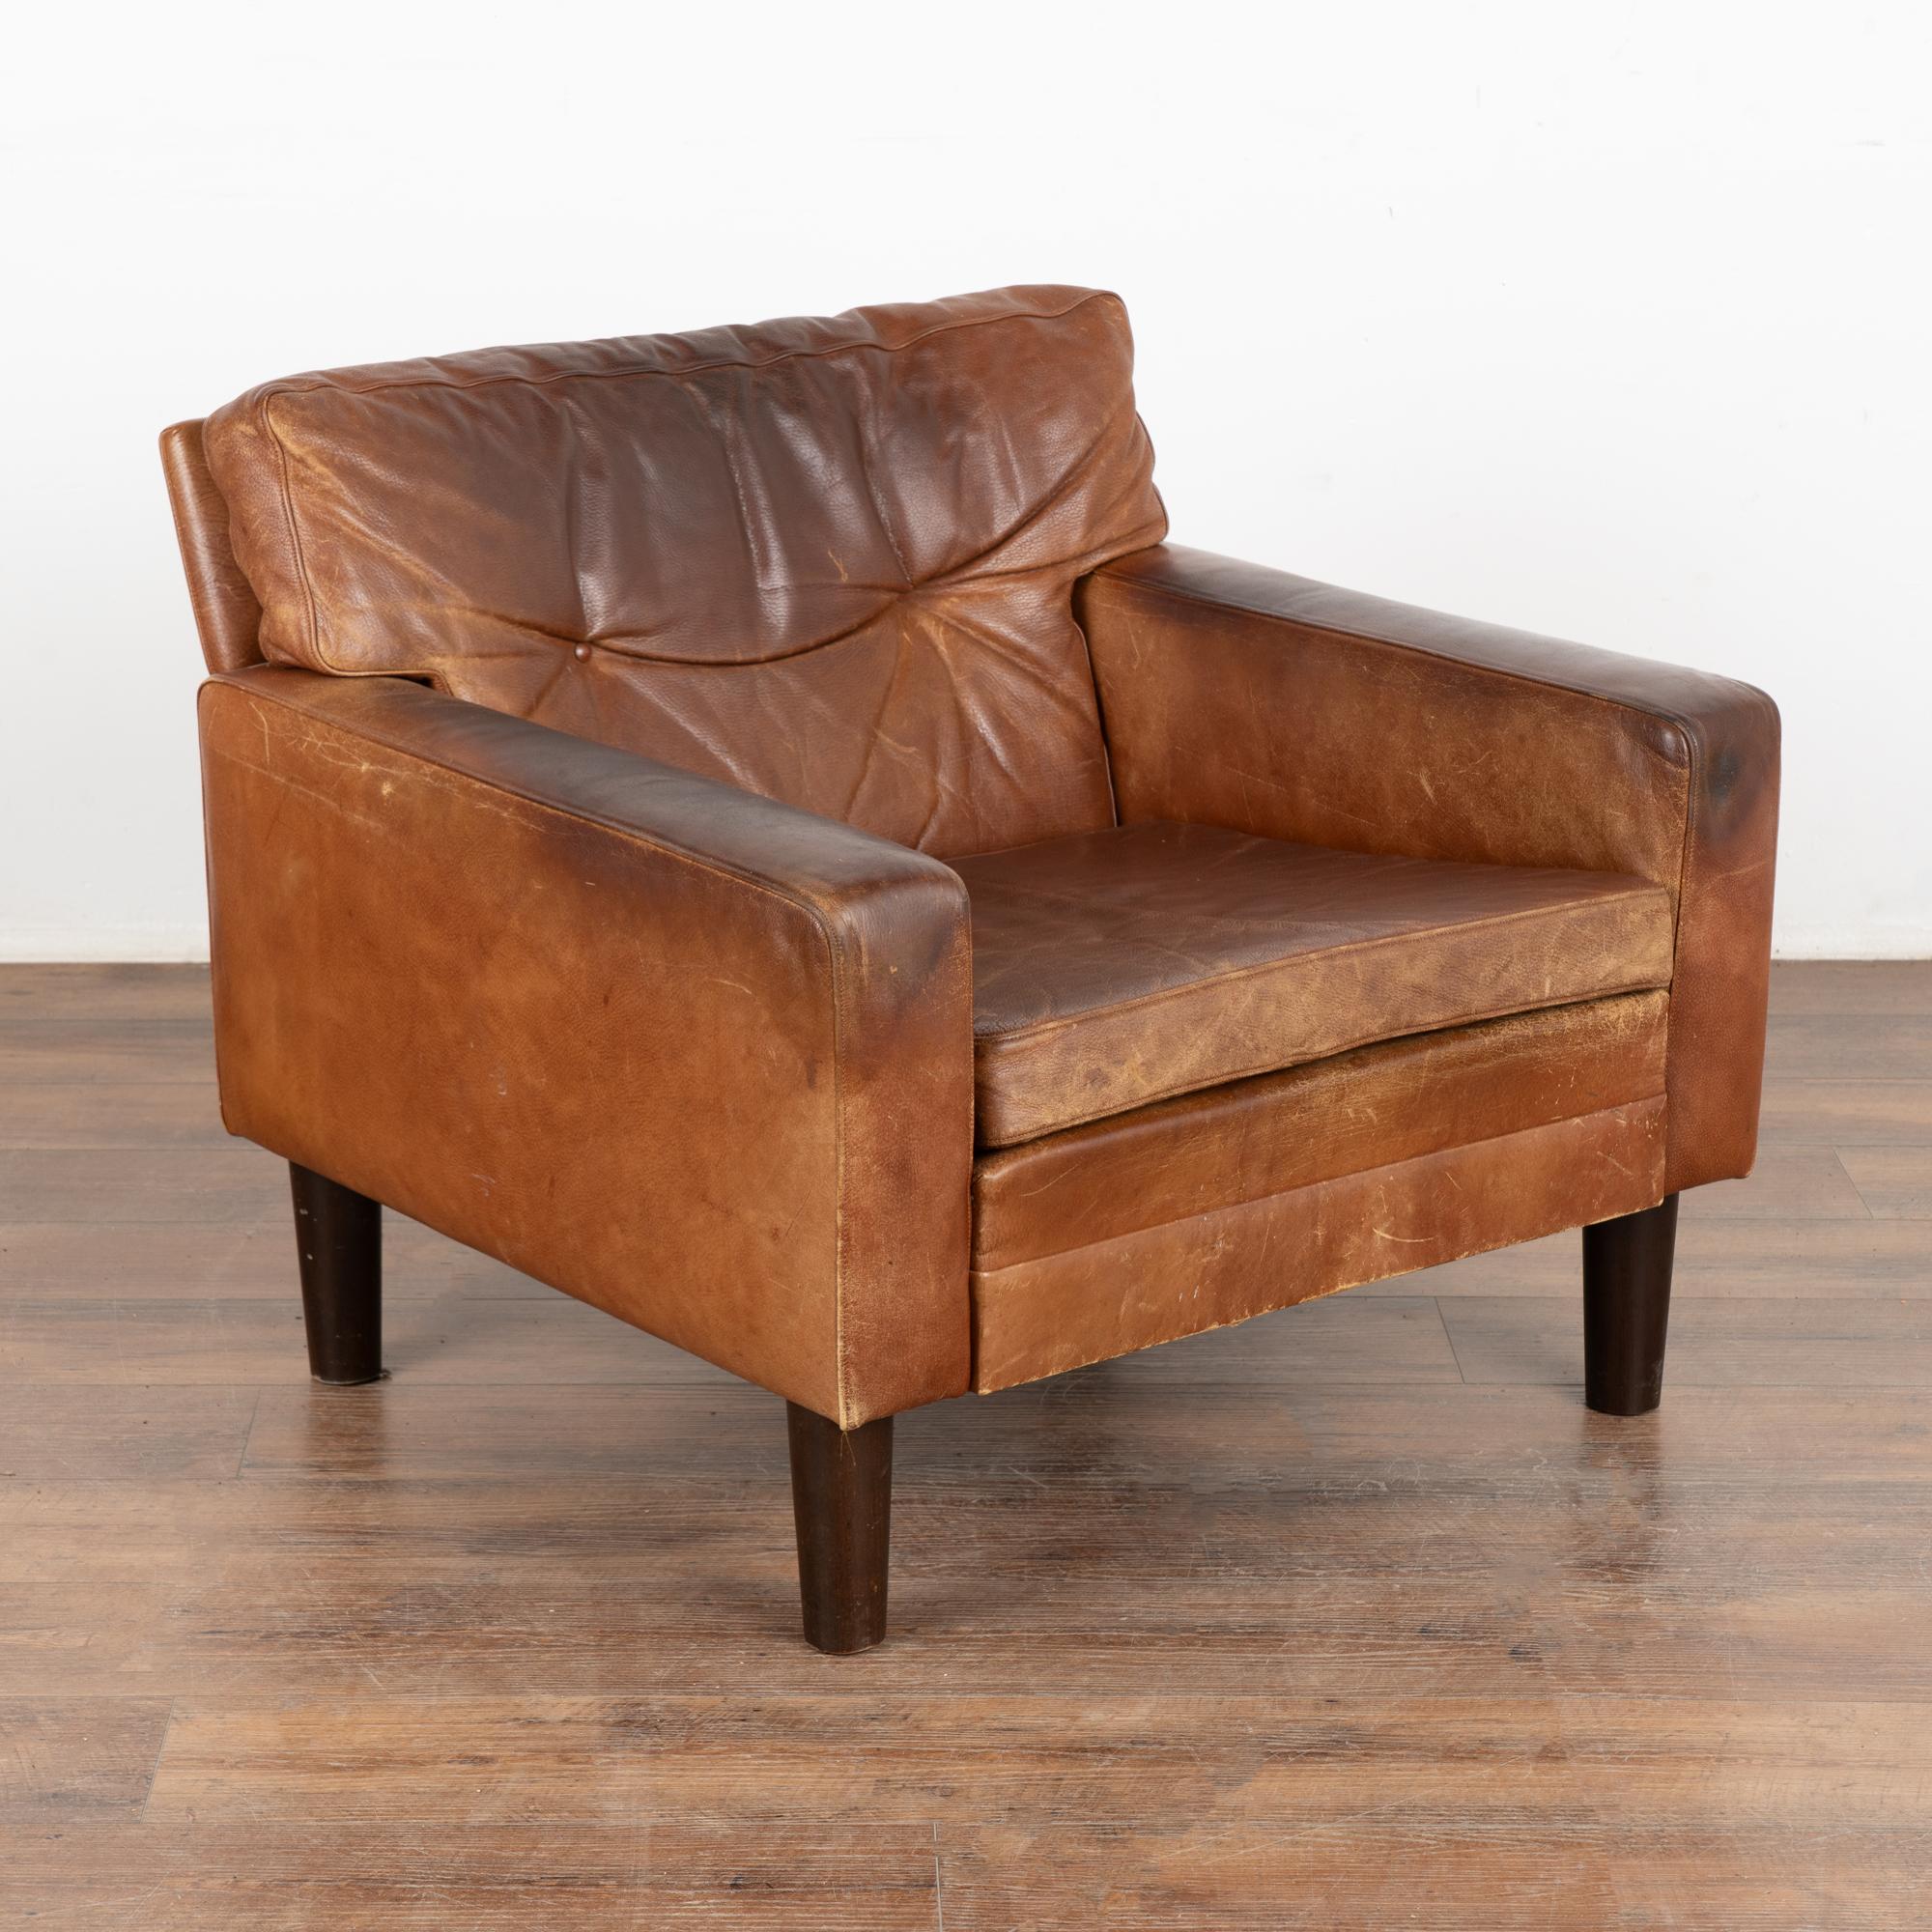 Mid-century modern brown leather arm chair resting on hard wood feet.
Cushions removeable with zipper closure.
Sold in vintage used condition; these chairs sit low. Leather shows typical age and use related signs of wear including multiple scuffs,